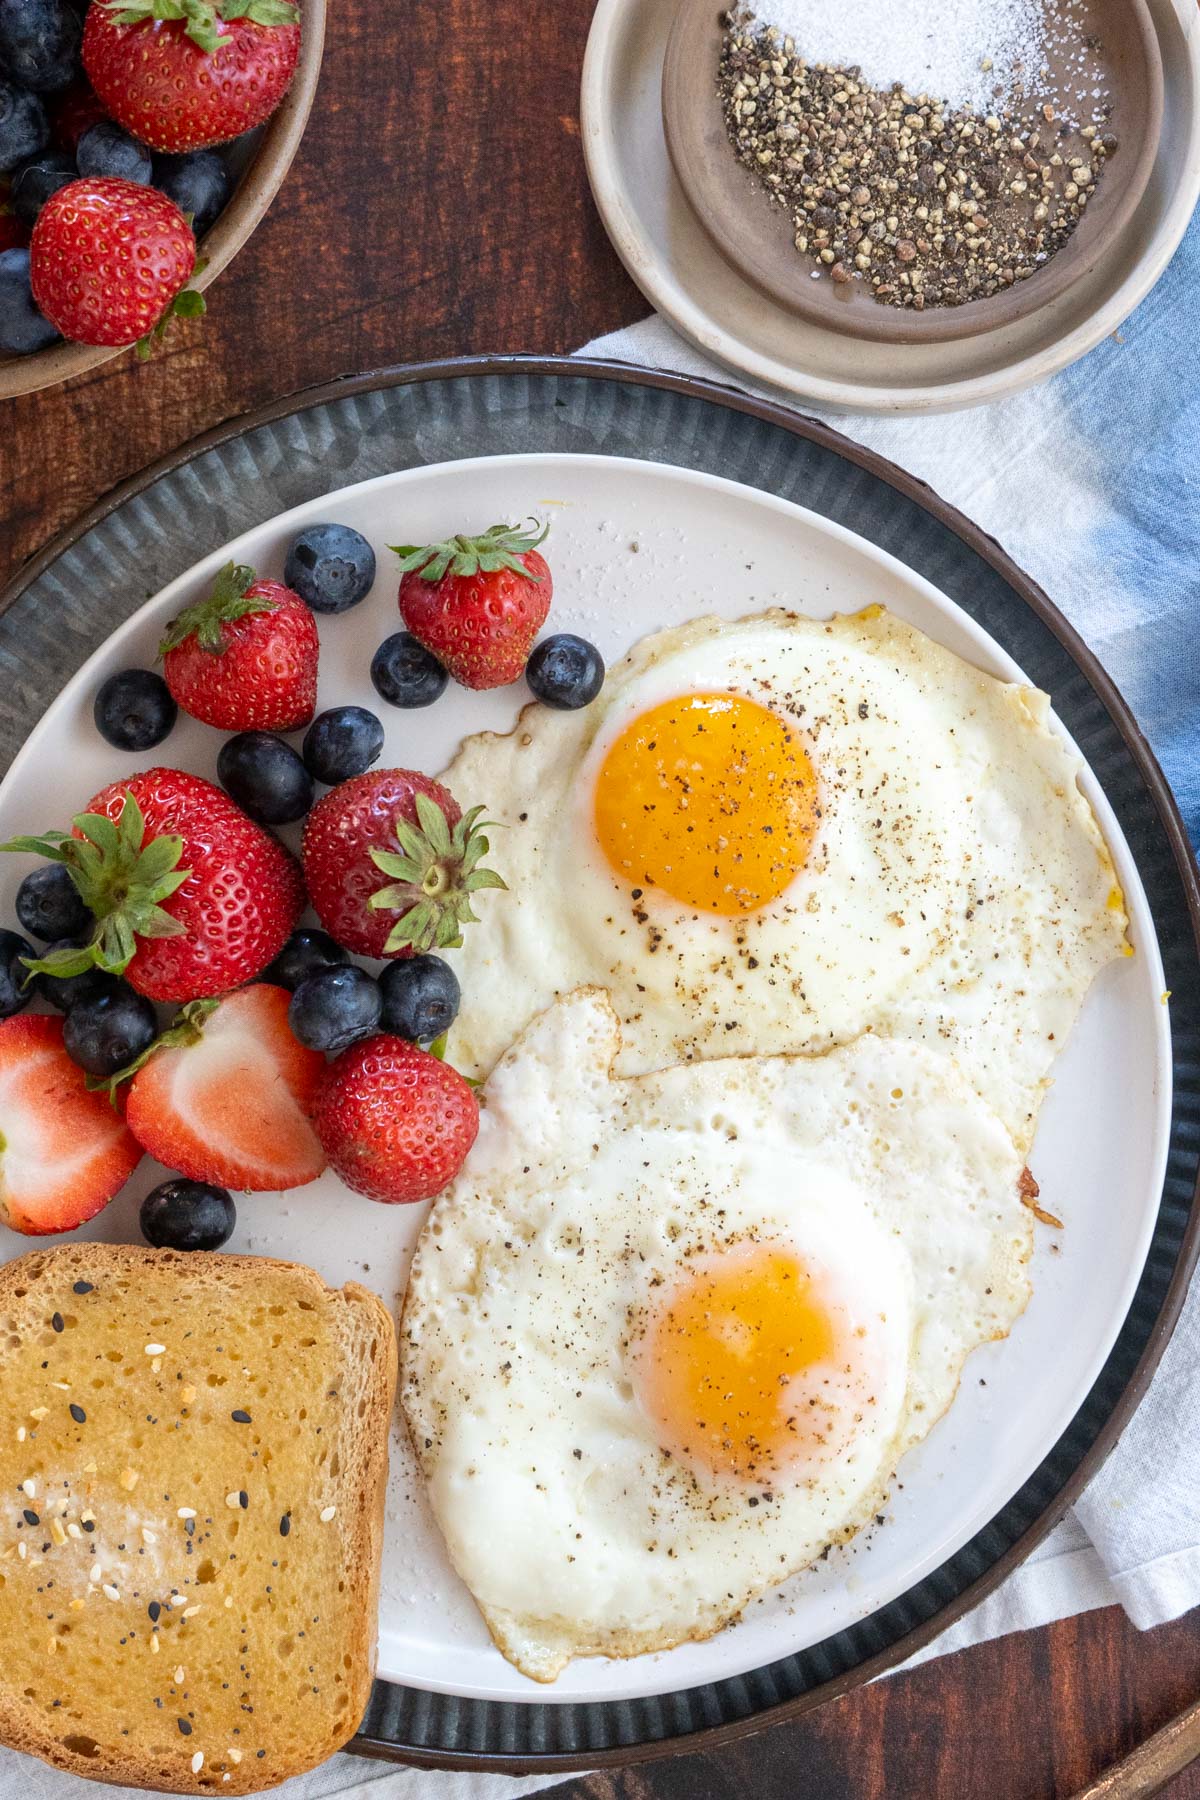 Sunny side up eggs on a plate with toast and fruit.